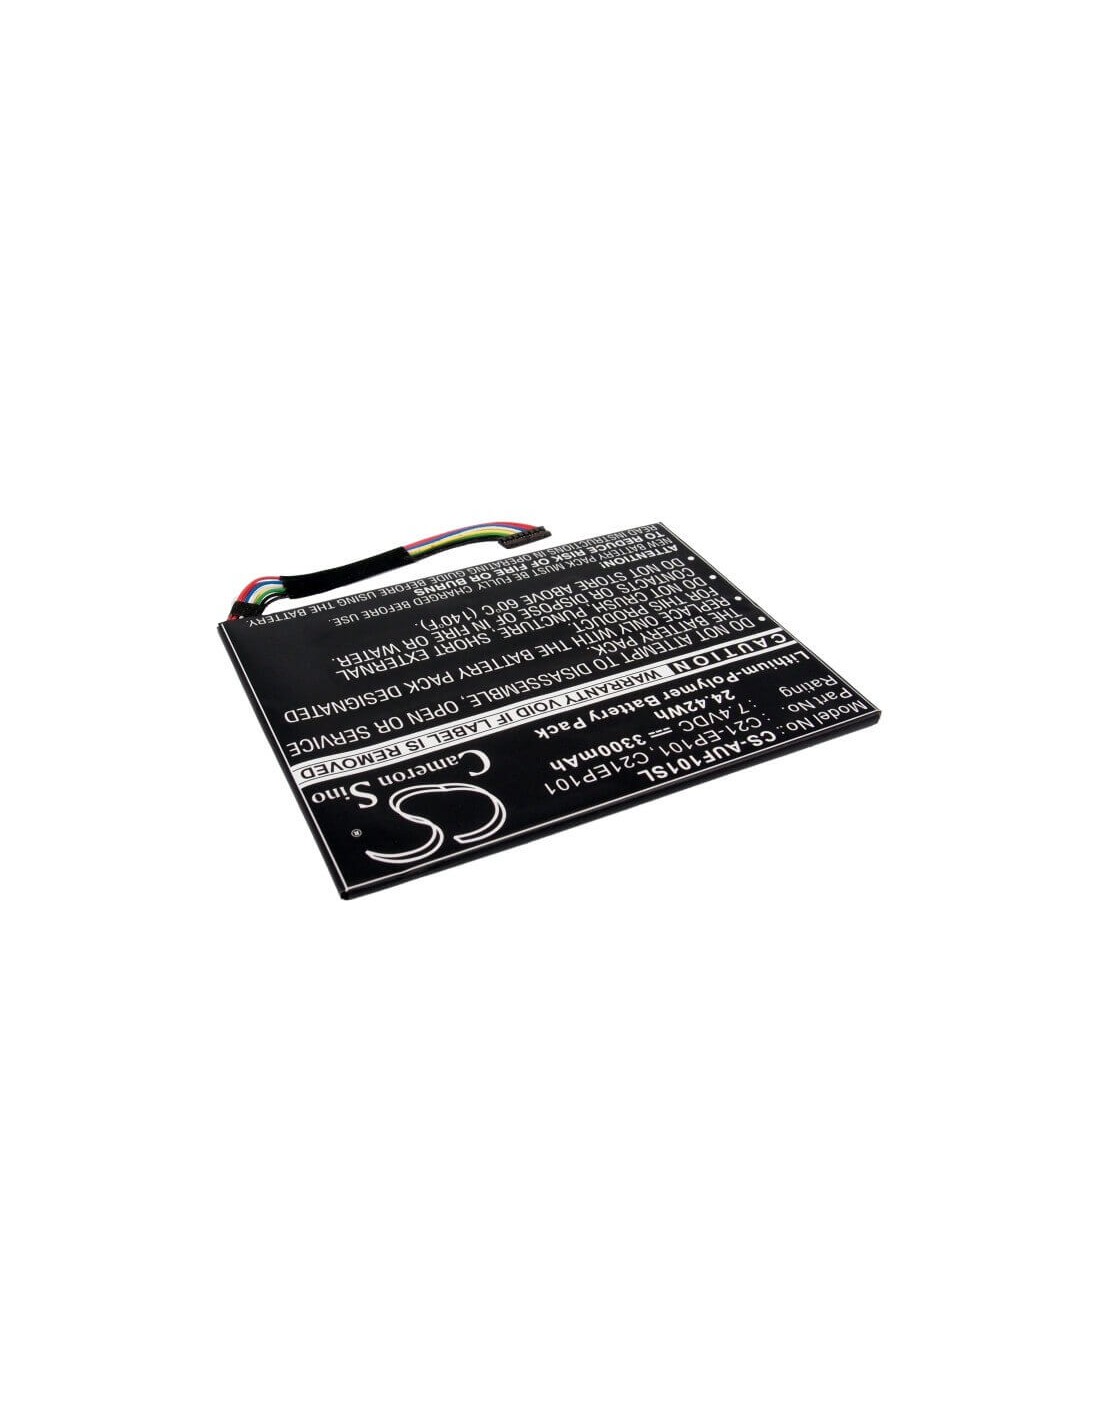 Battery for Asus Eee Transformer Tf101, Eee Pad Transformer Tr101 Prefix, Eee Pad Transformer Tf101 Prefix Mobile Docking 7.4V, 